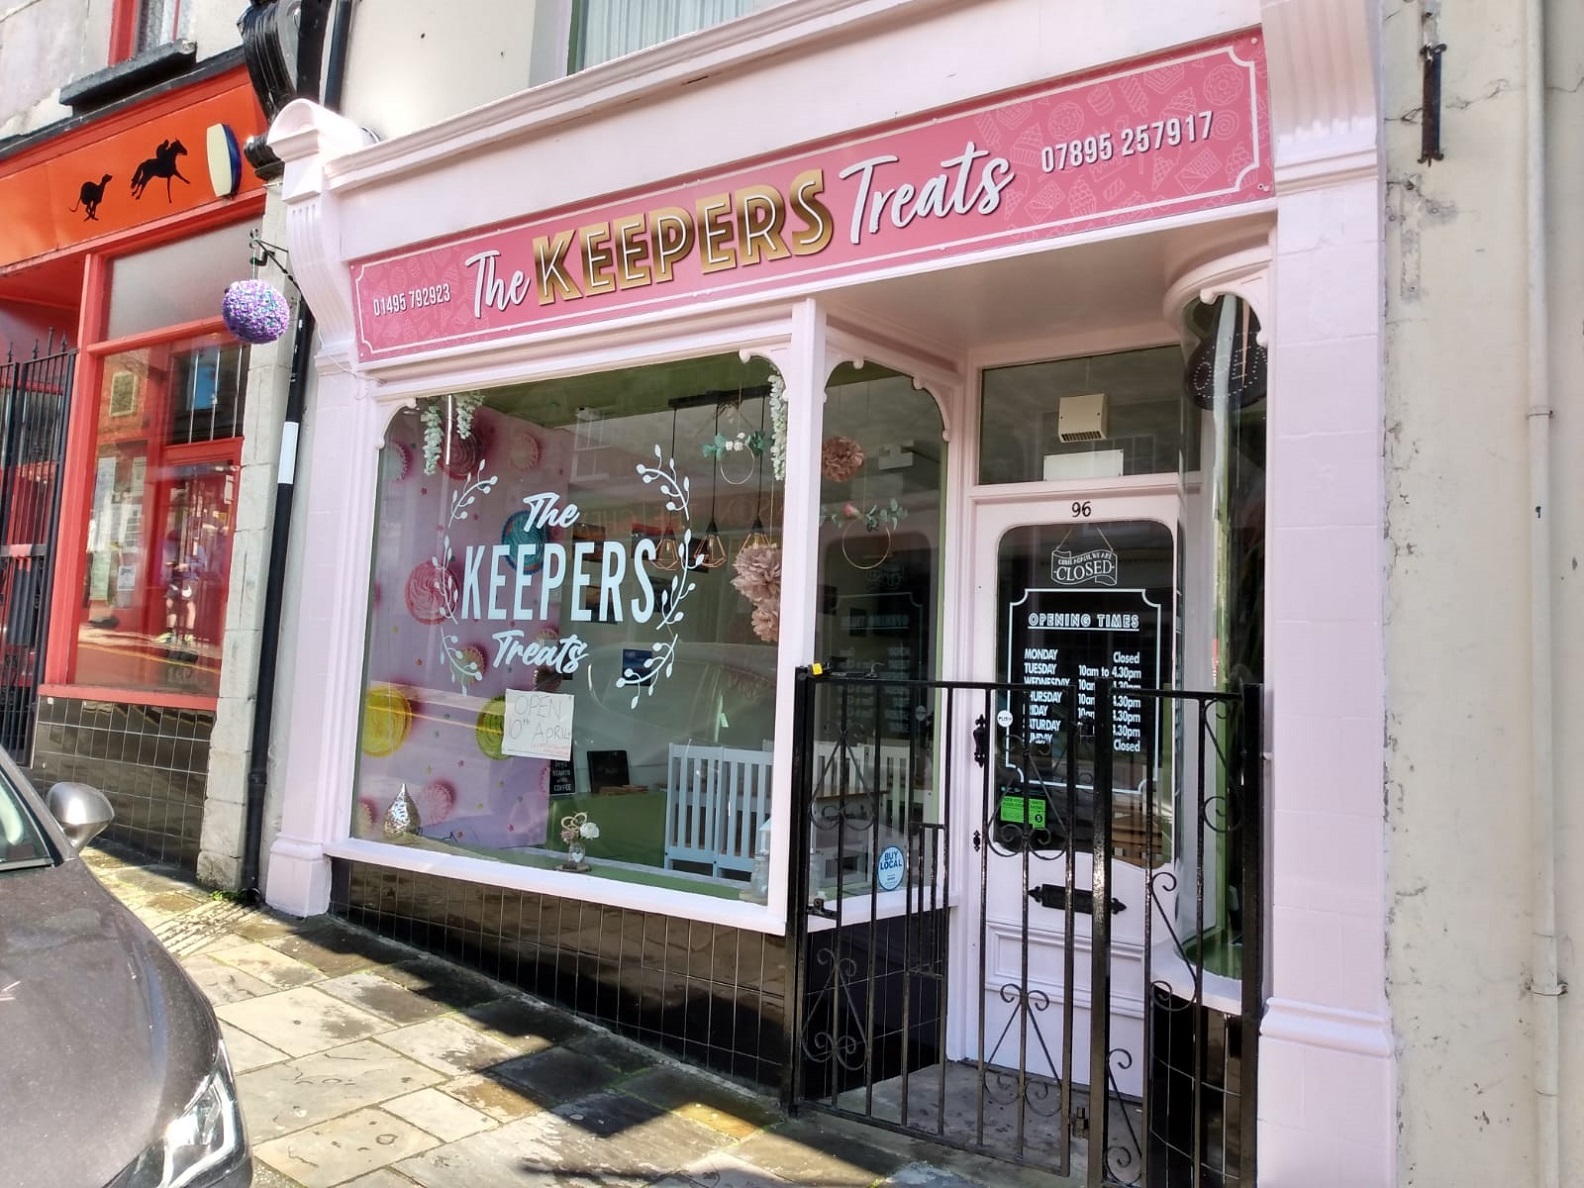 The Keepers Treats, which is set to reopen after recently rebranding.